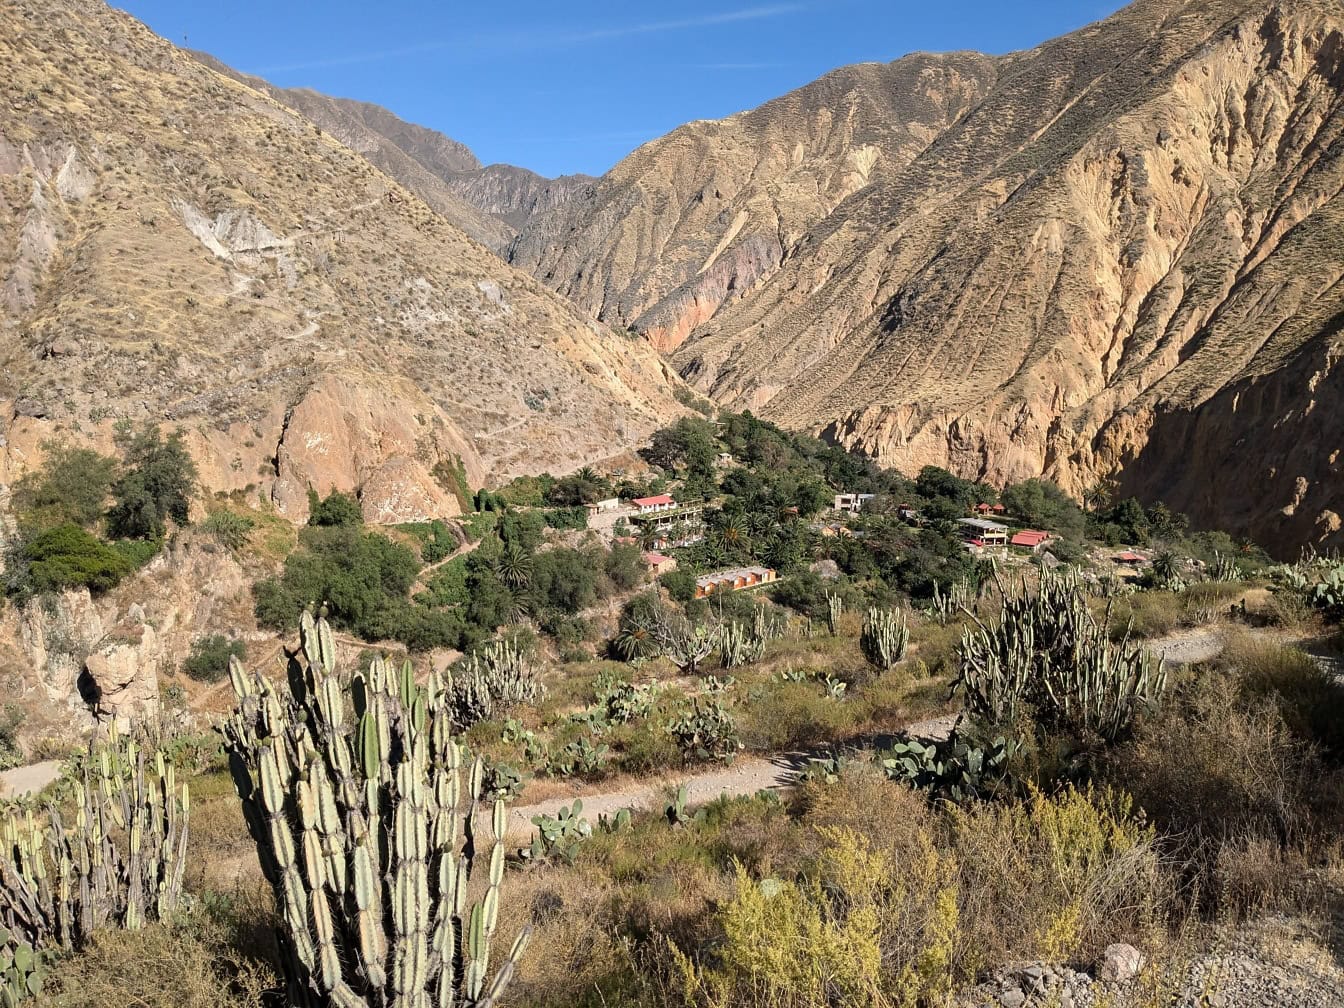 Cactuses in a valley of Colca canyon in Peru